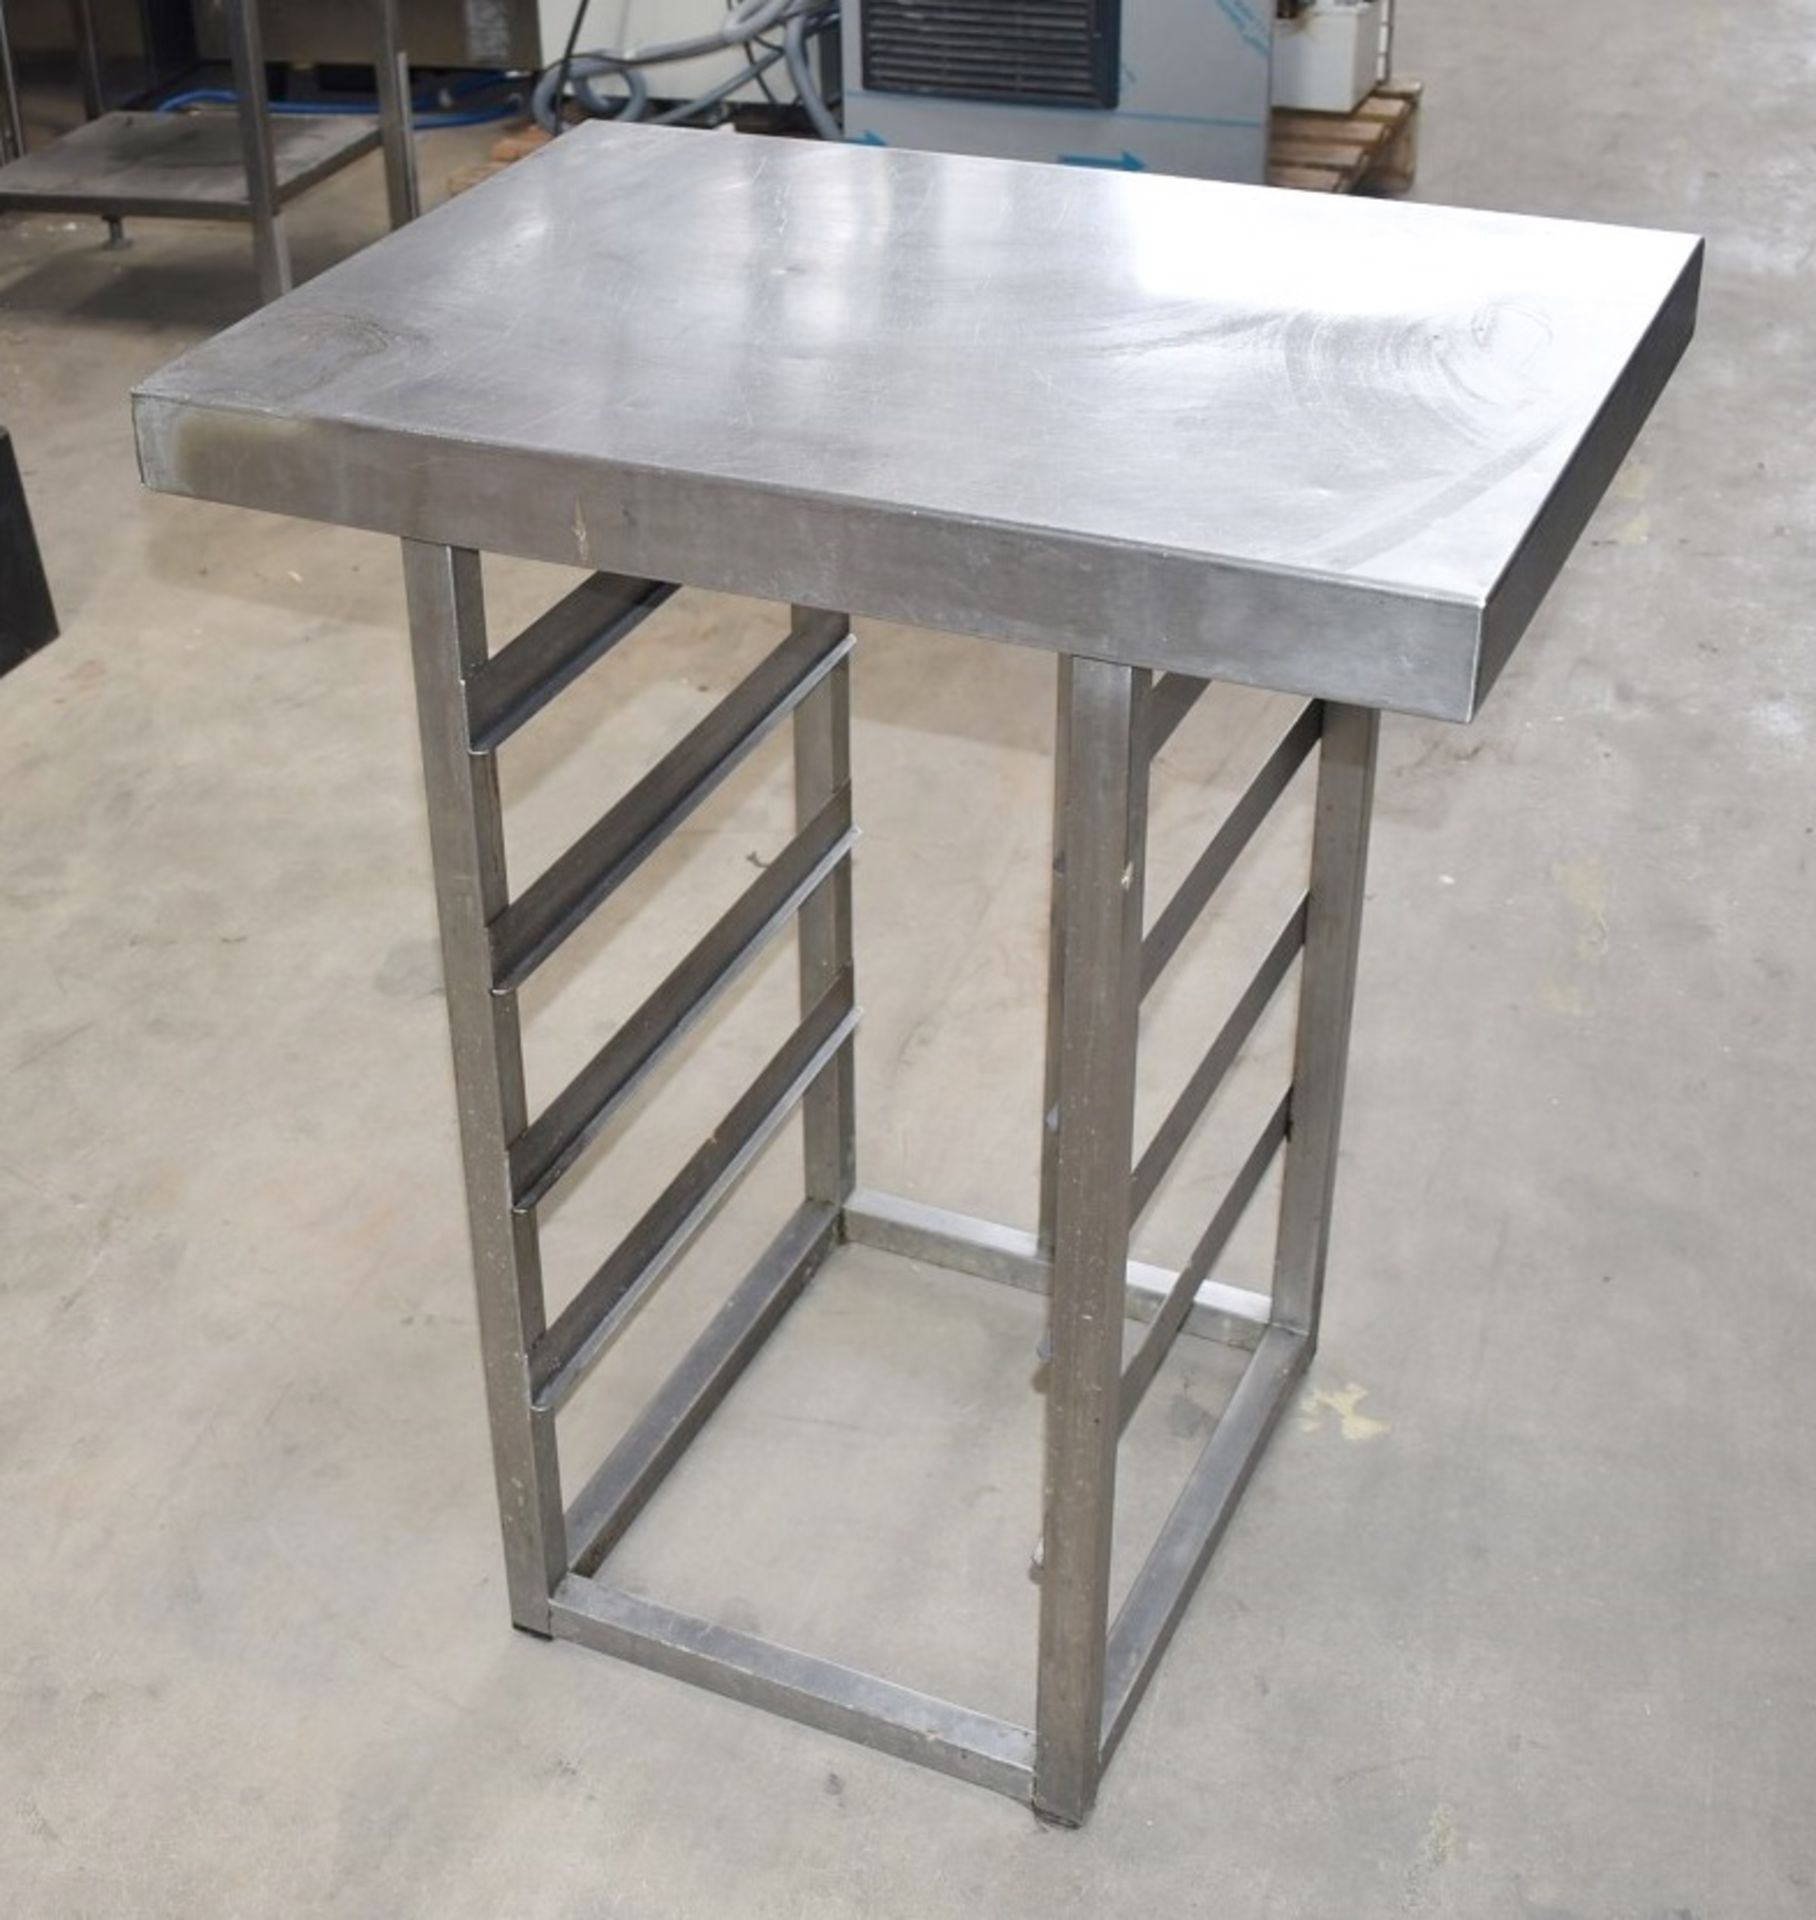 1 x Stainless Steel Prep Table With Tray Runners - Dimensions: H84 x W70 x D50 cms - Image 5 of 5